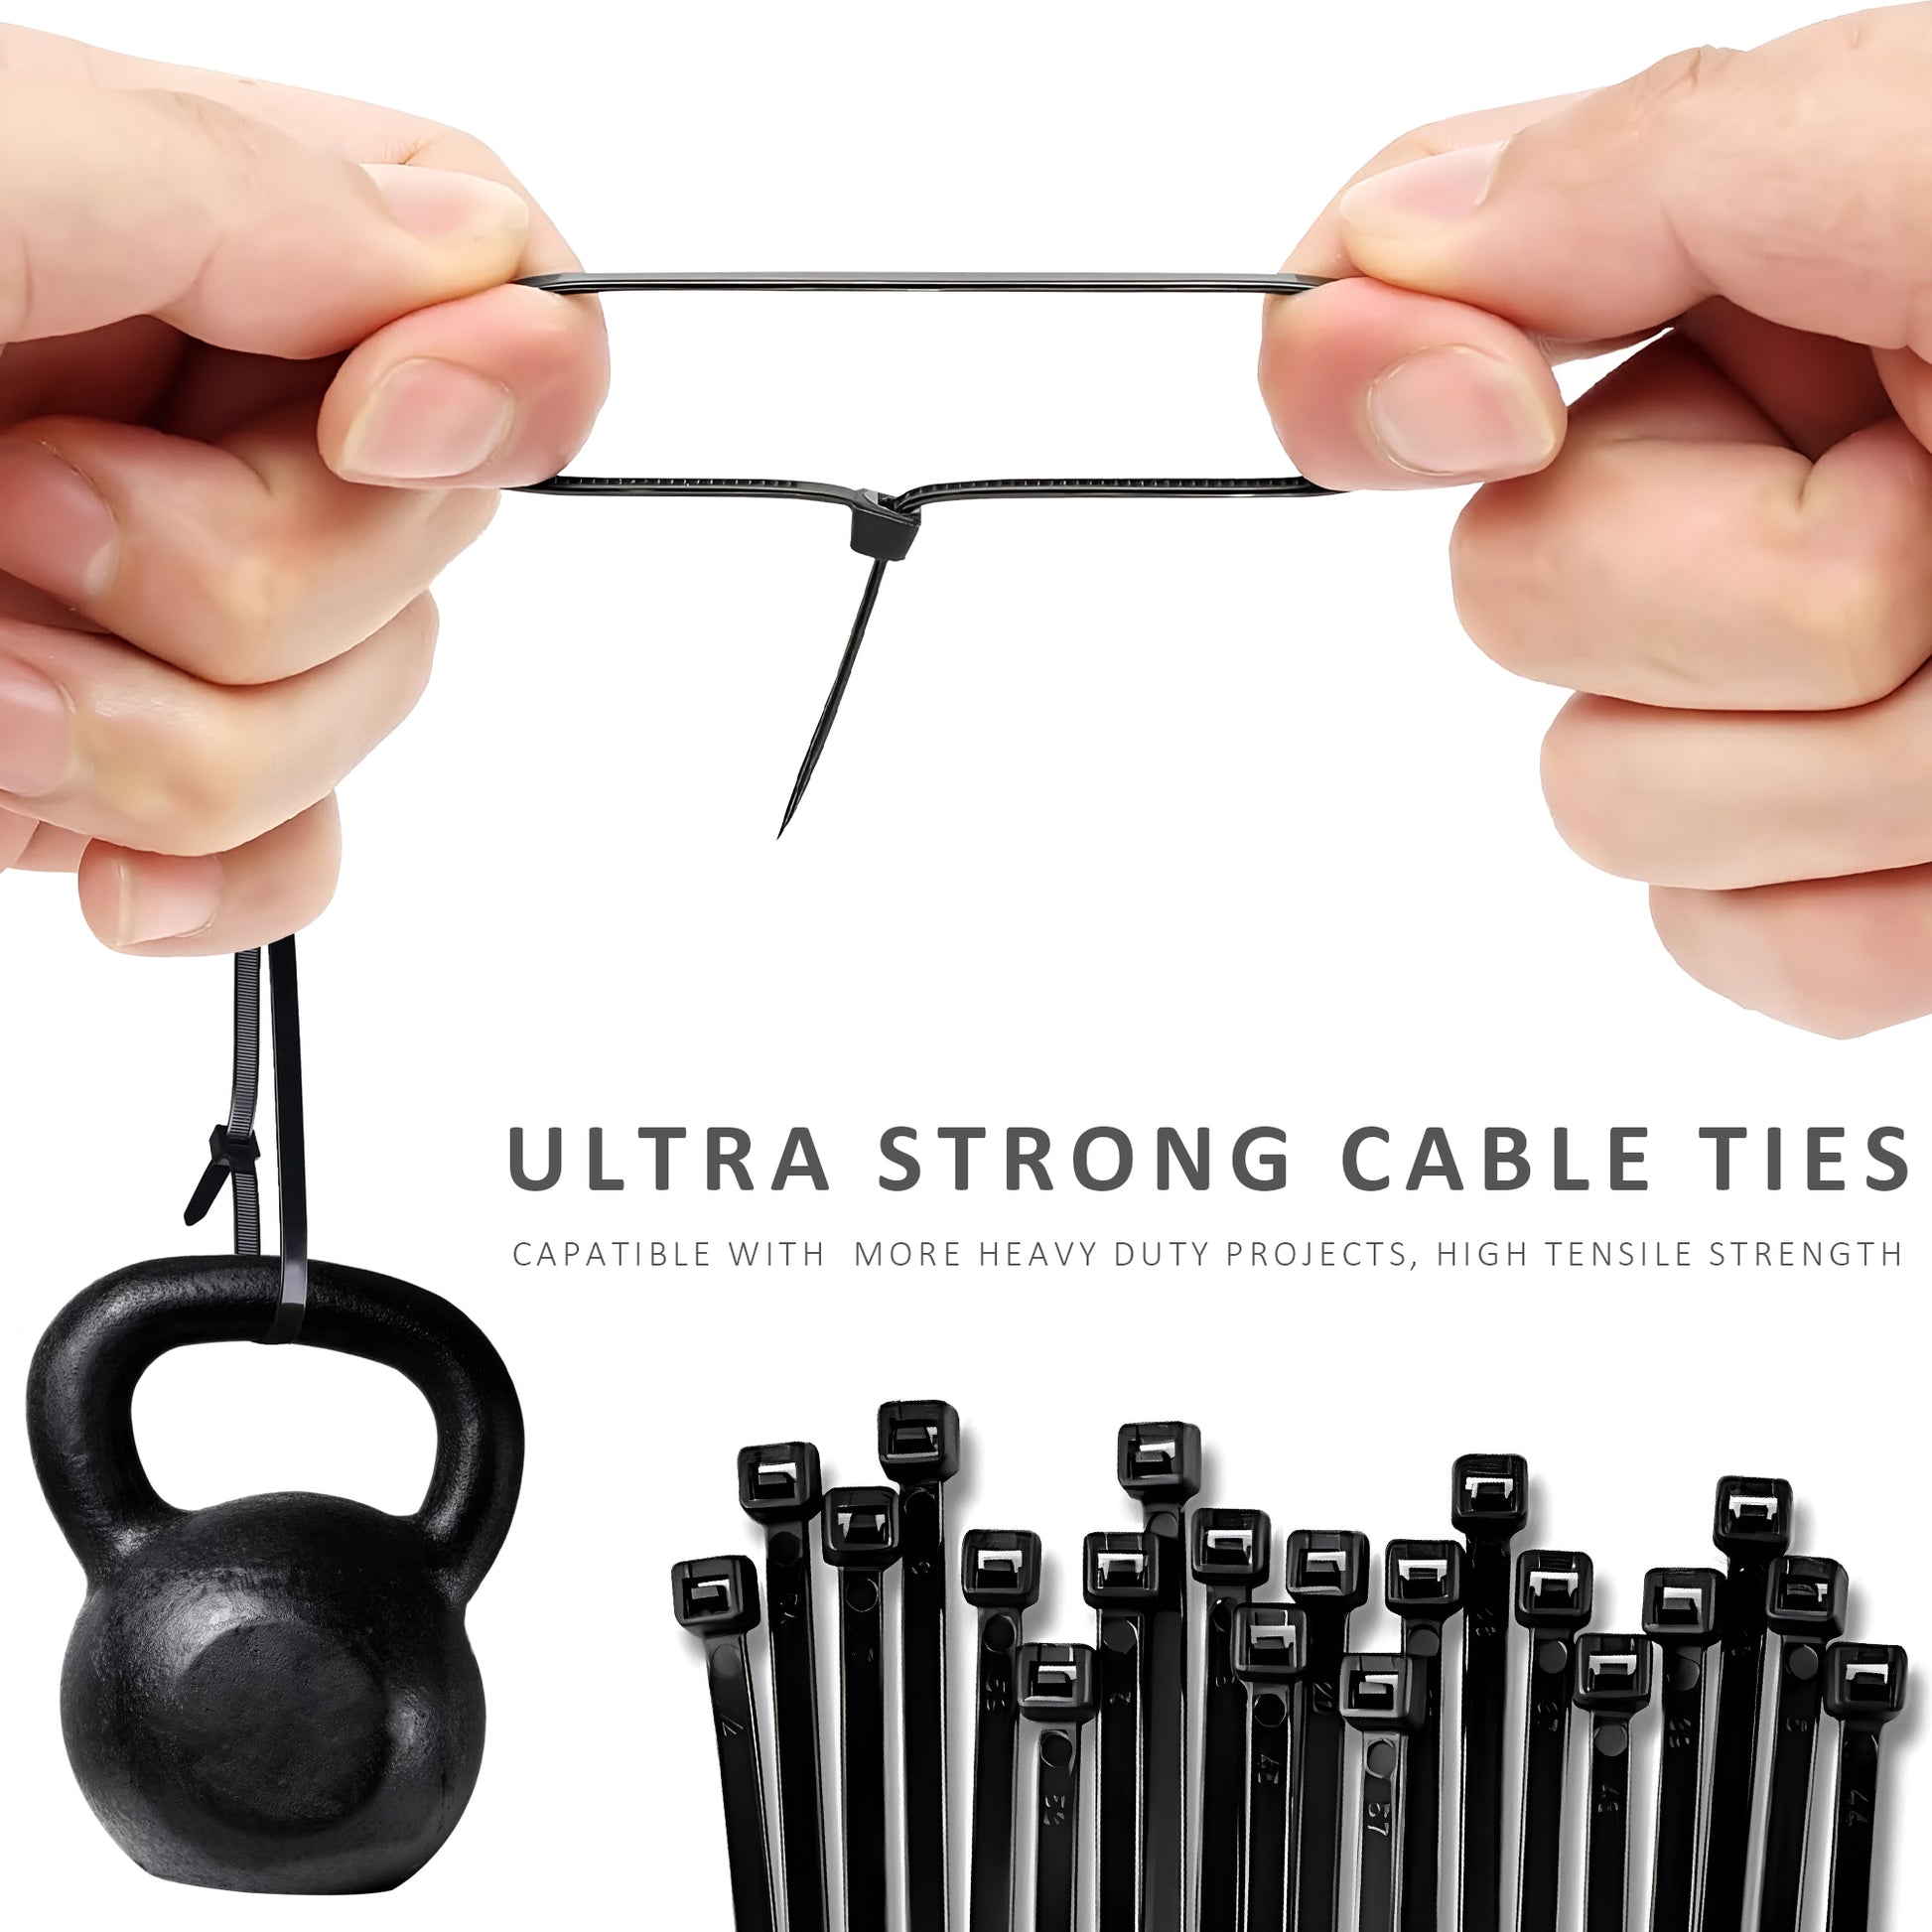 Black self-locking nylon cable ties for heavy-duty wire